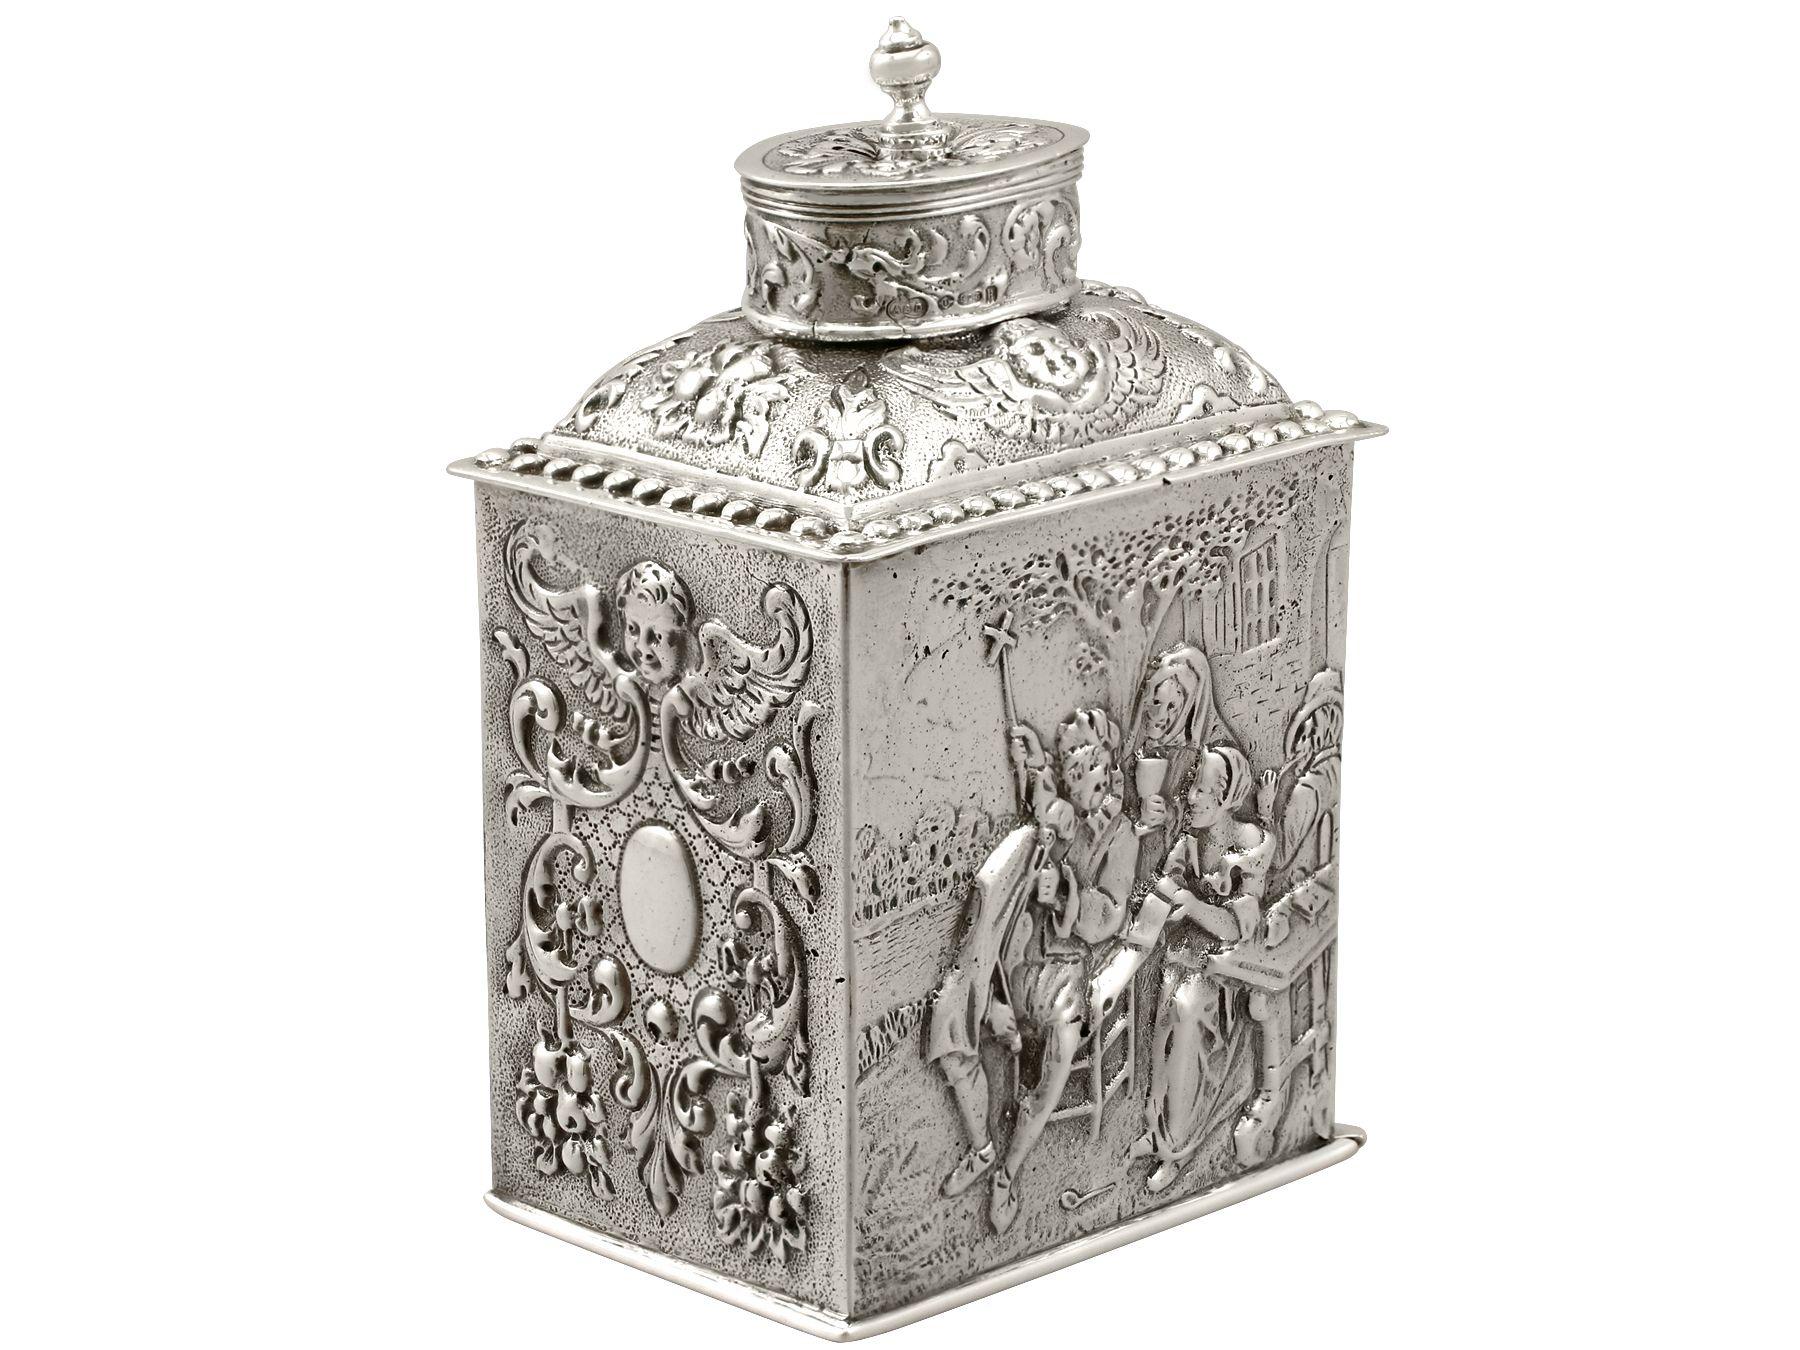 An exceptional, fine and impressive antique English George V sterling silver tea caddy; an addition to our antique silver tea ware collection.

This exceptional antique George V sterling silver tea caddy has a rectangular form.

The opposing